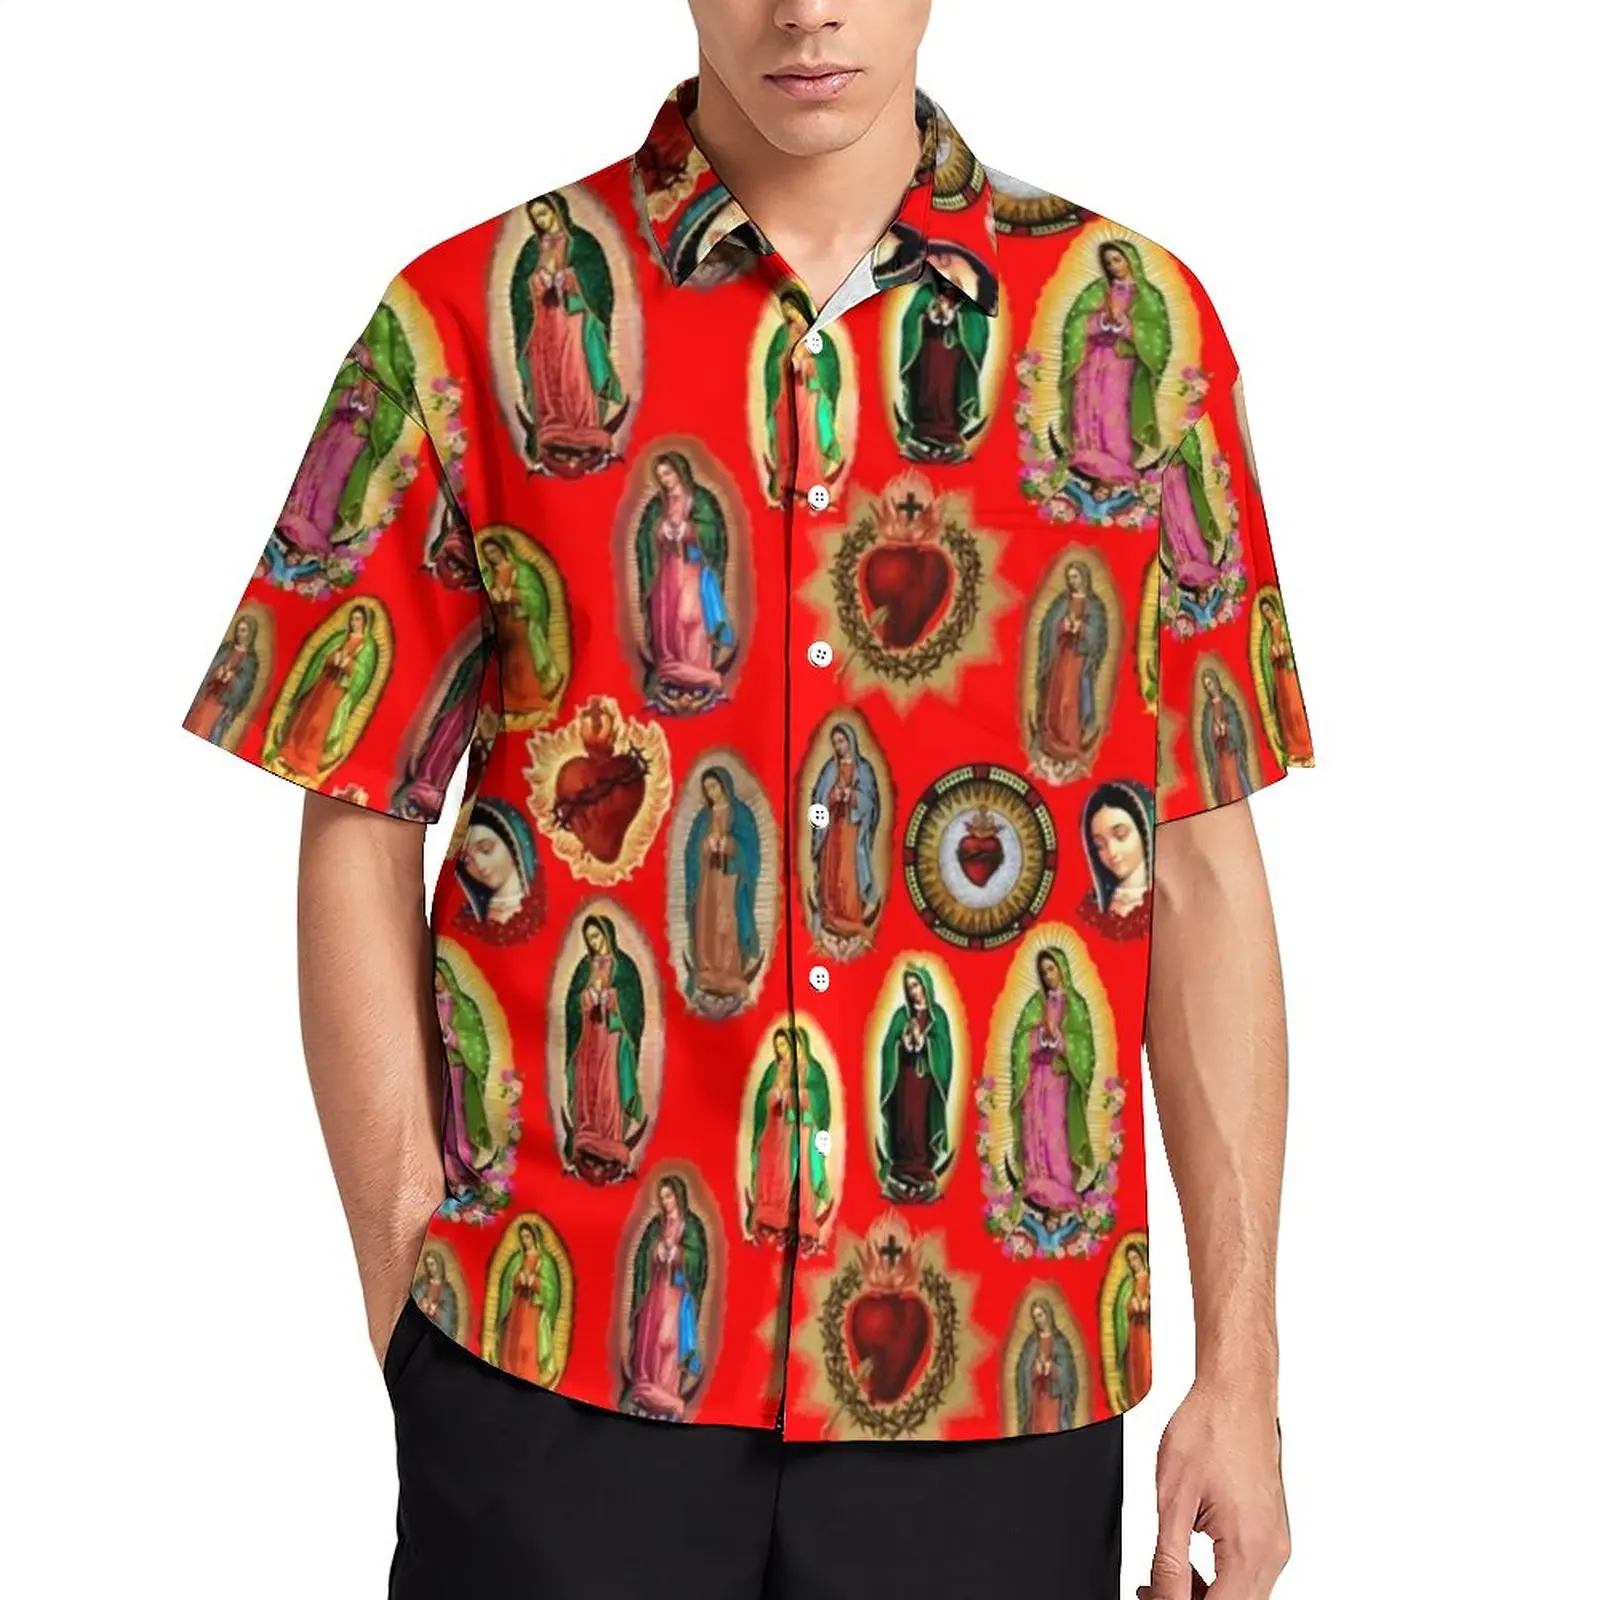 

Our Lady of Guadalupe Beach Shirt Virgin Mary Hawaiian Casual Shirts Trending Blouses Short-Sleeve Graphic Clothing Plus Size